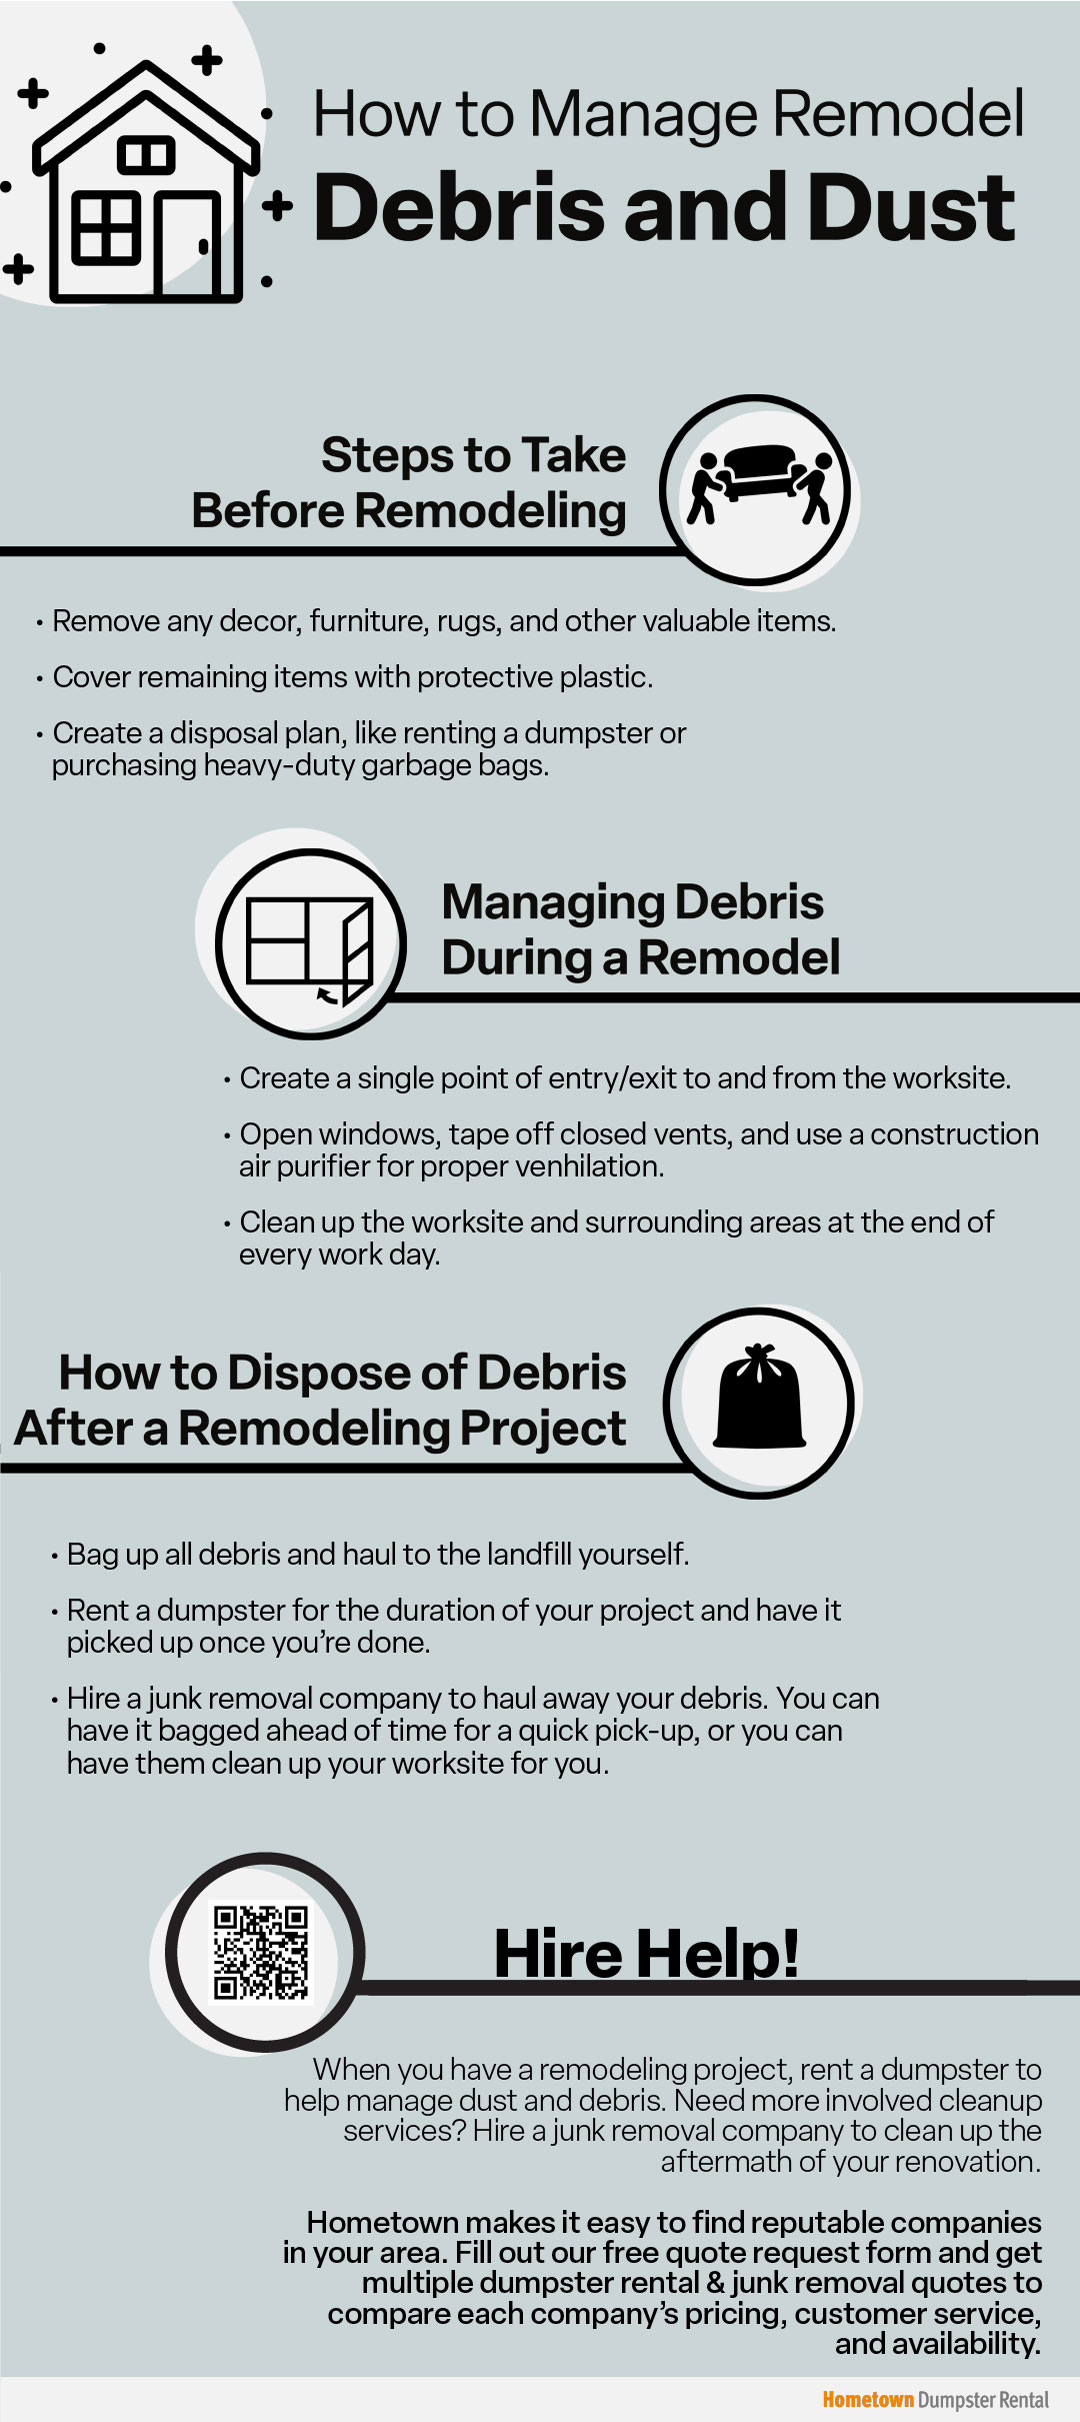 How to Manage Remodel Debris and Dust Infographic